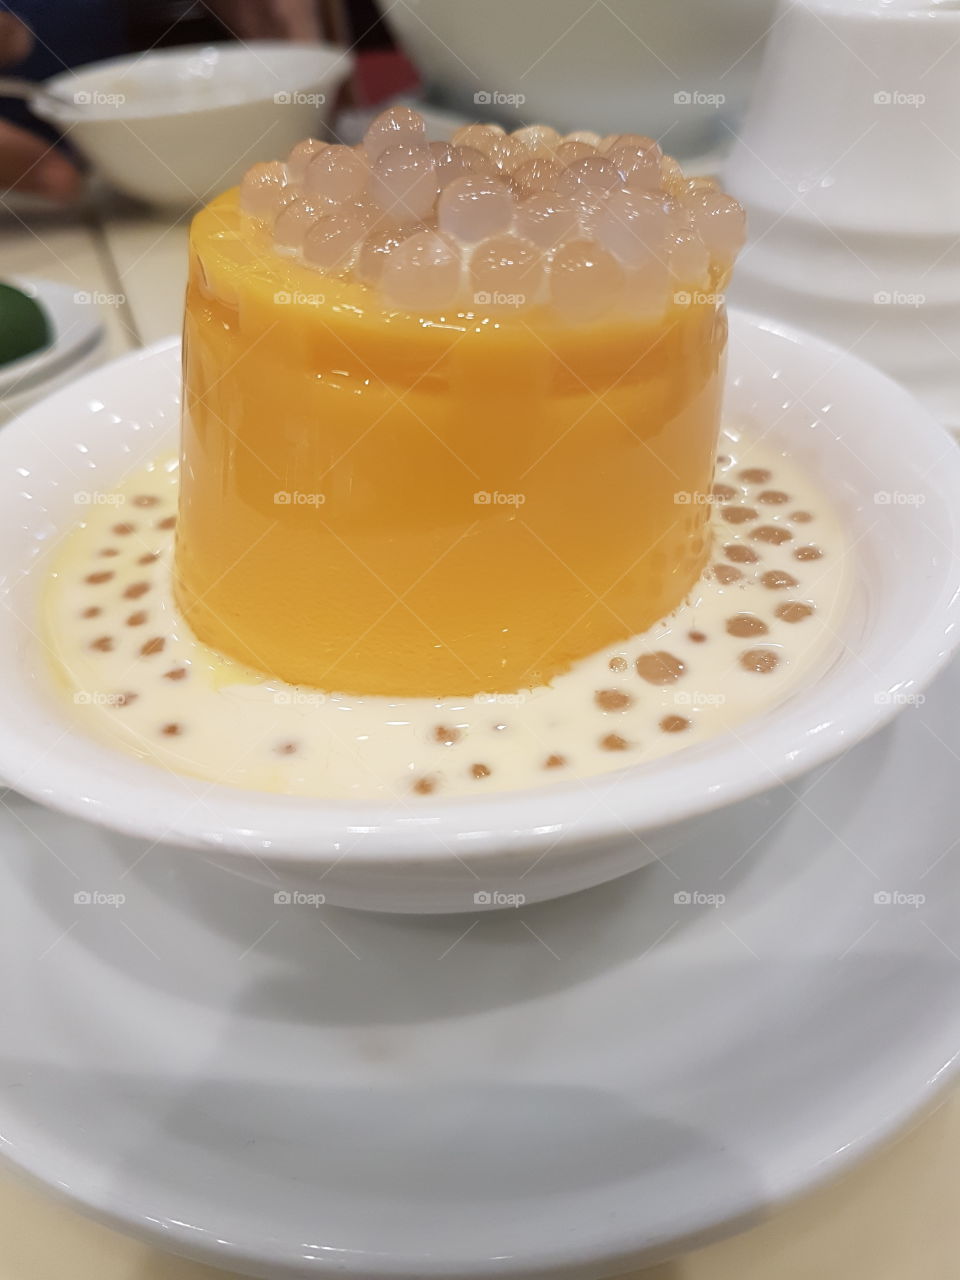 chilled mango-flavored tapioca jelly and pearls dessert